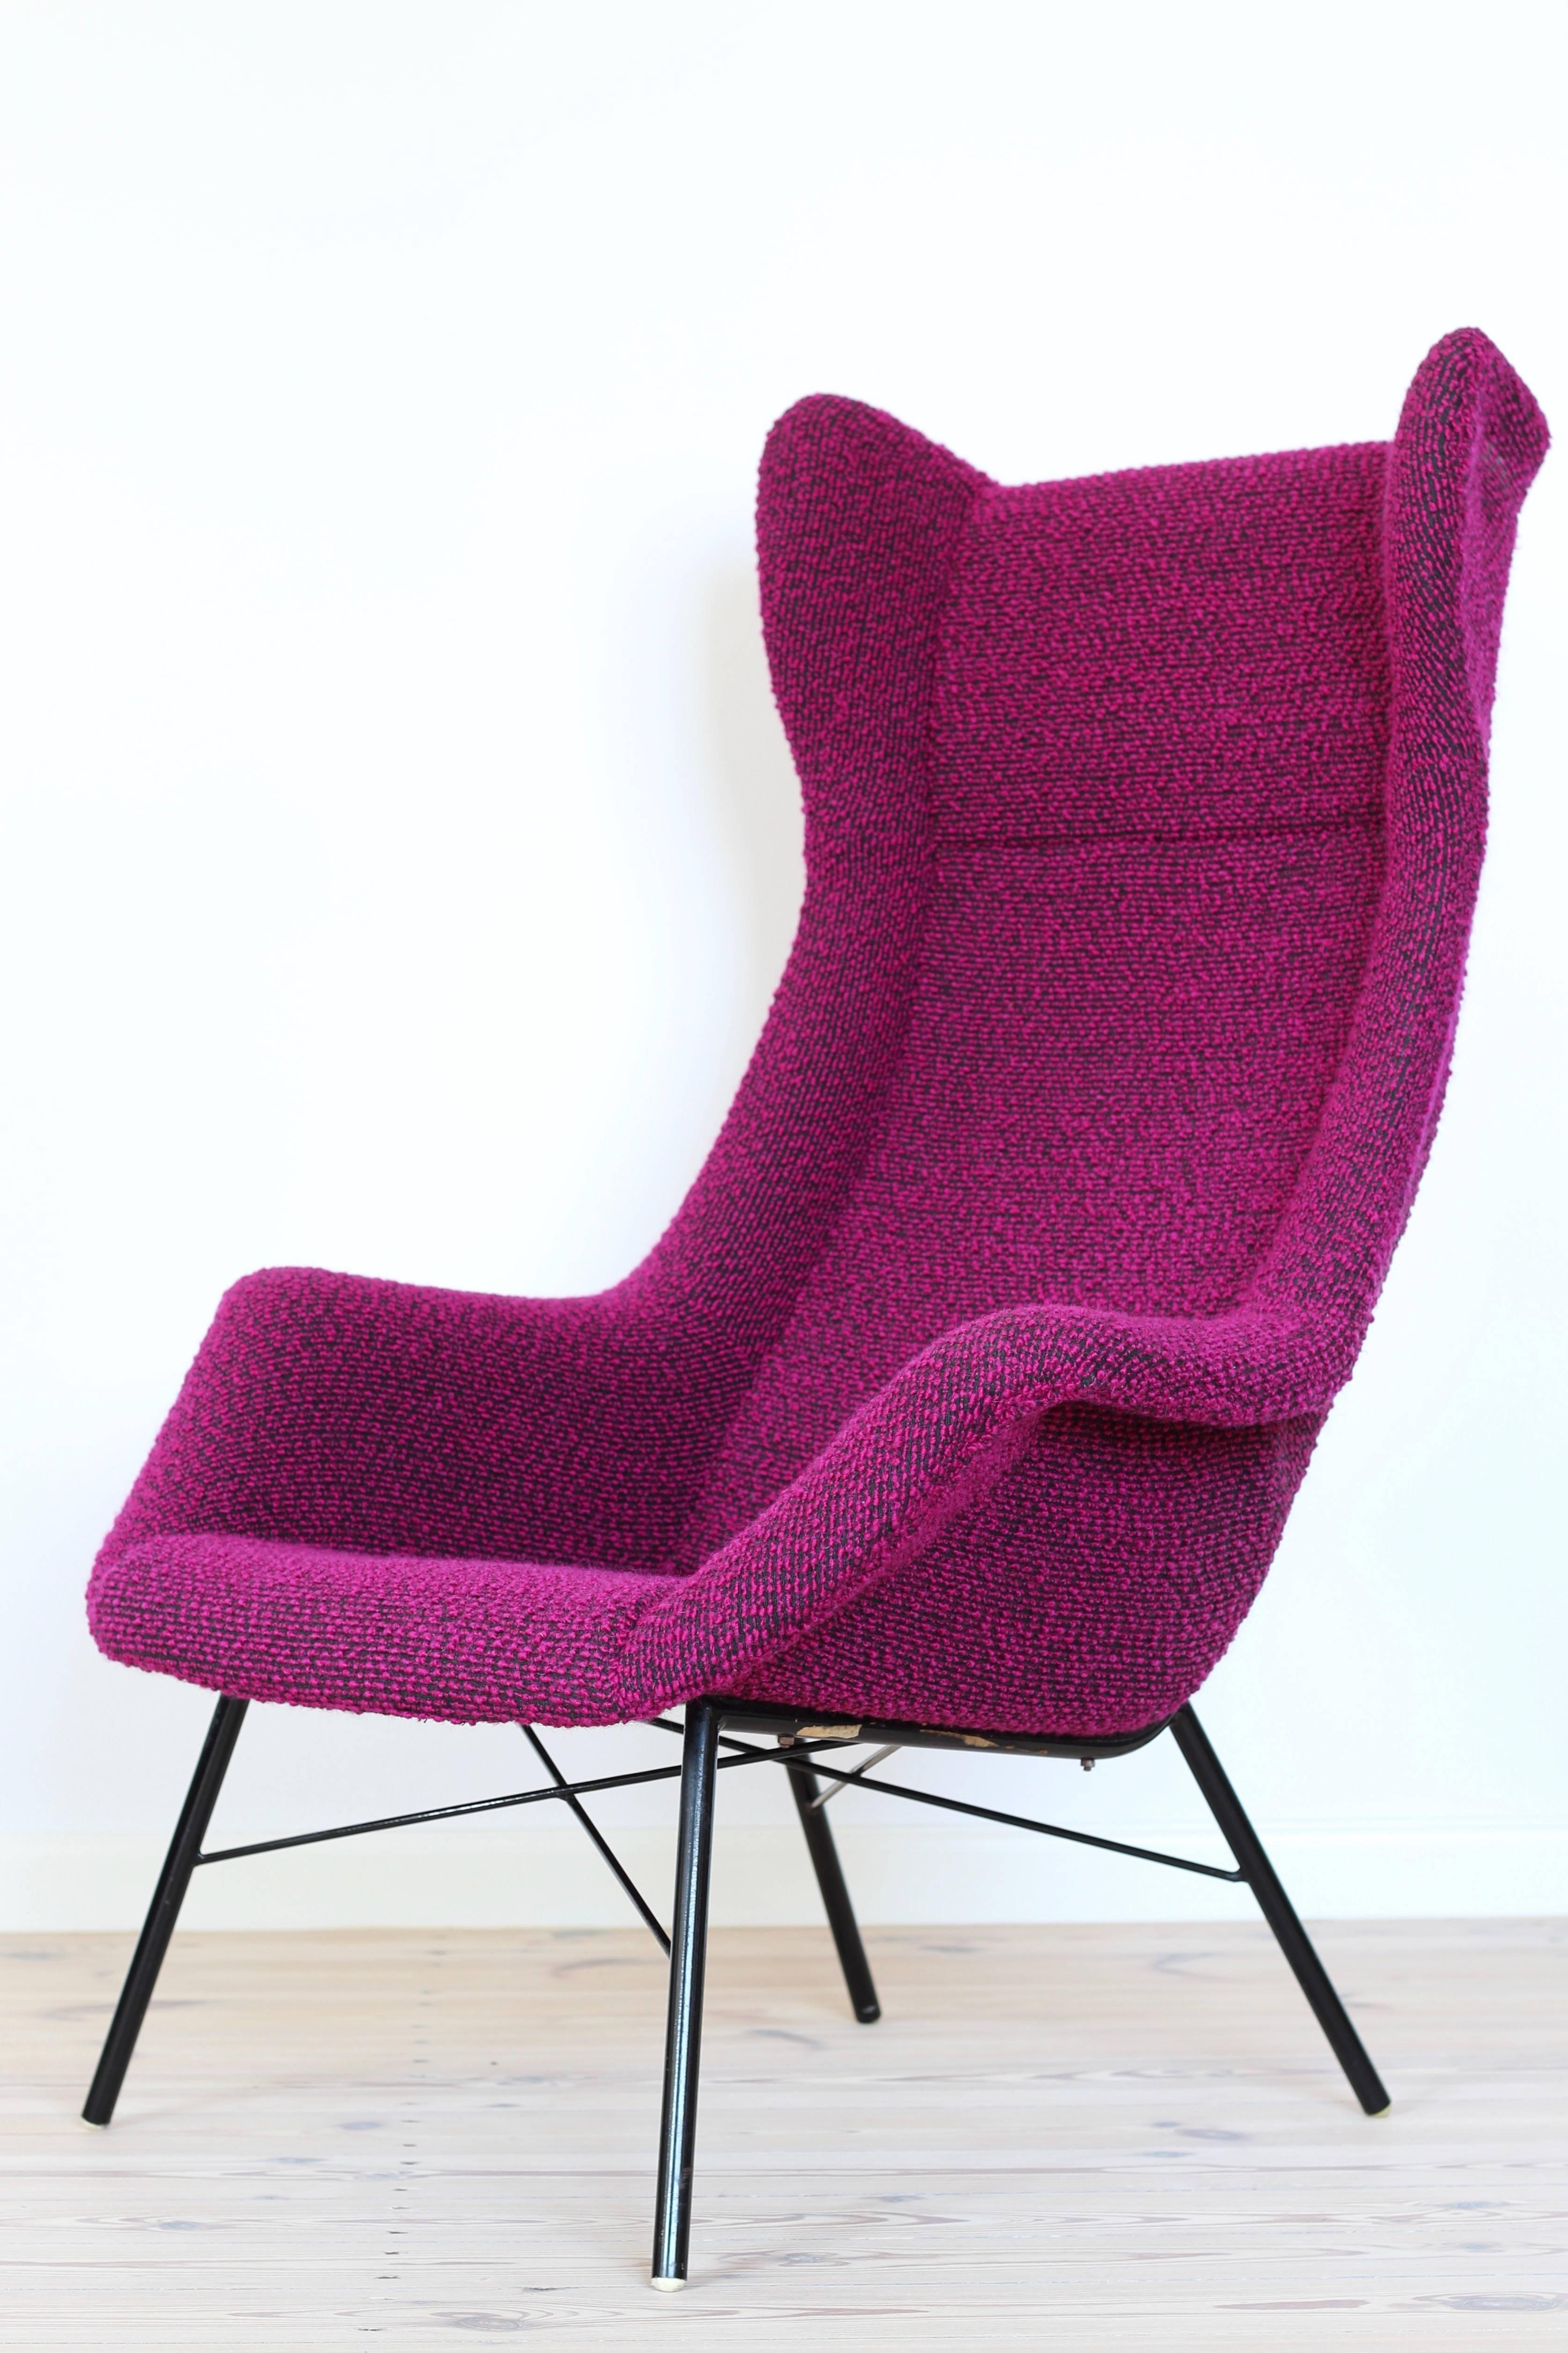 Wingback armchair designed by Miroslav Navratil.
Produced by TON in Bystrice in the 1960s.
The original purple material (sheep's wool bouclé) was cleaned and is in excellent condition. Small spots of glue sticking out from underneath on the sides